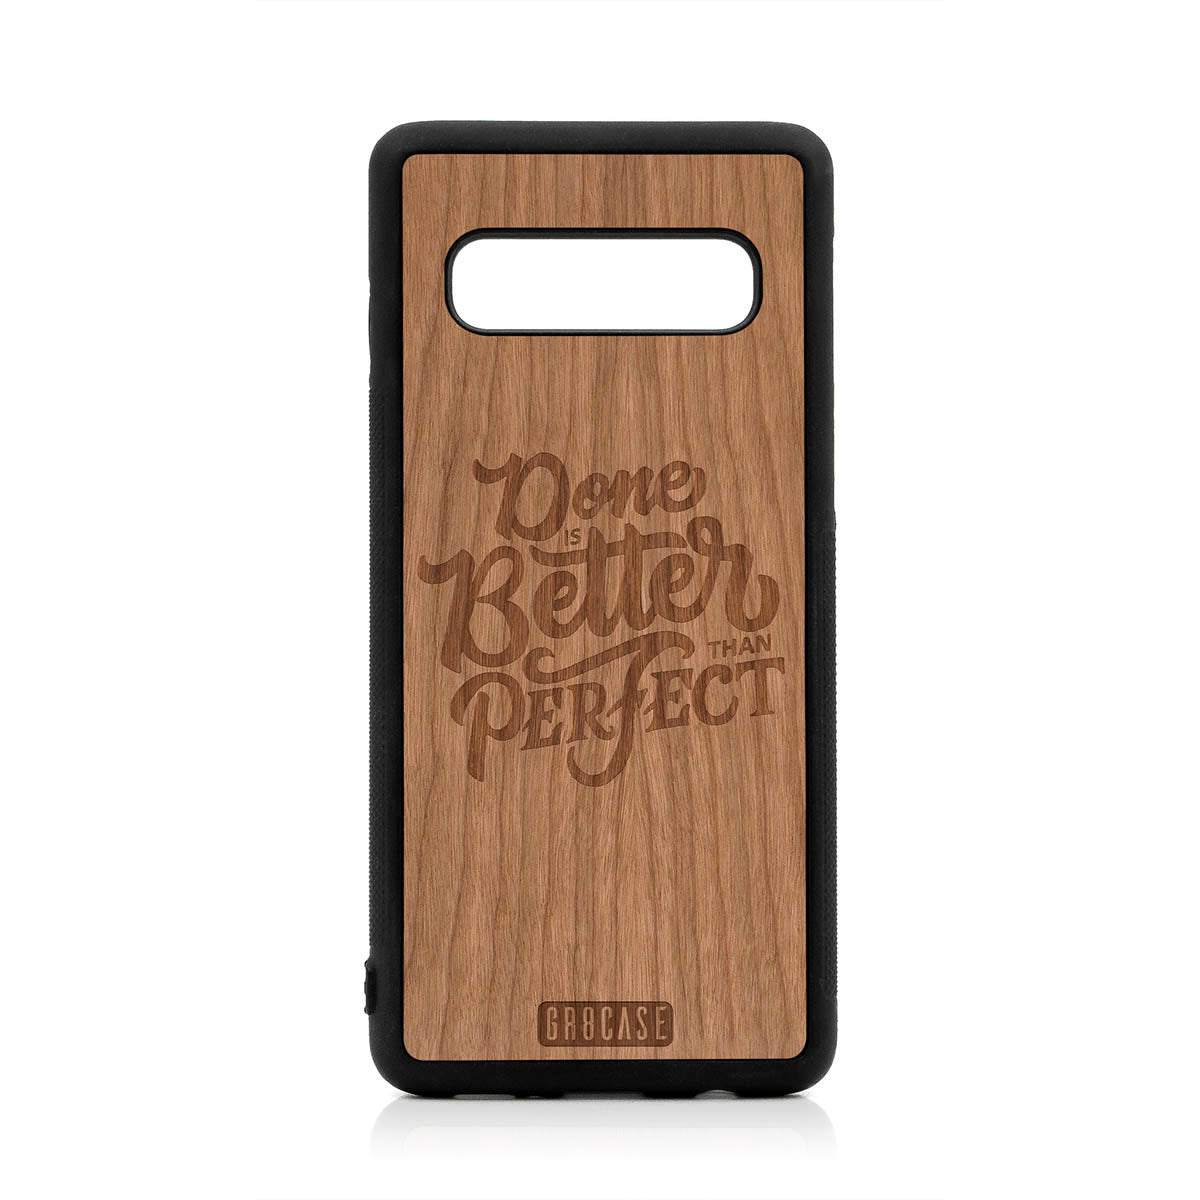 Done Is Better Than Perfect Design Wood Case For Samsung Galaxy S10 by GR8CASE